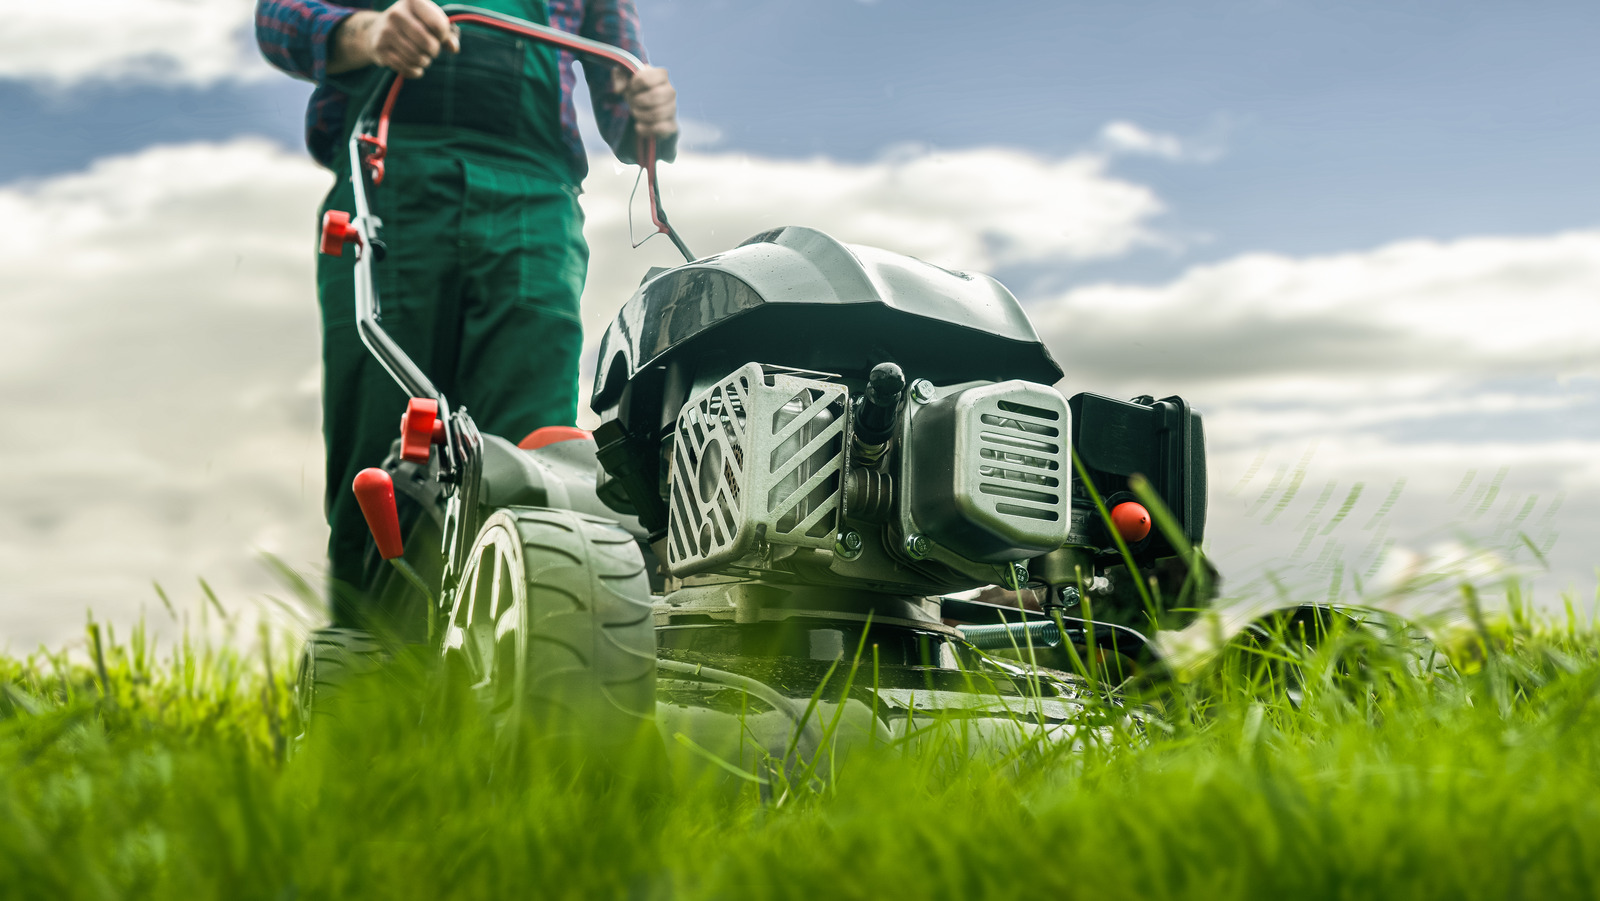 How Long Can You Rent A Lawn Mower From Home Depot & What Does It Cost?